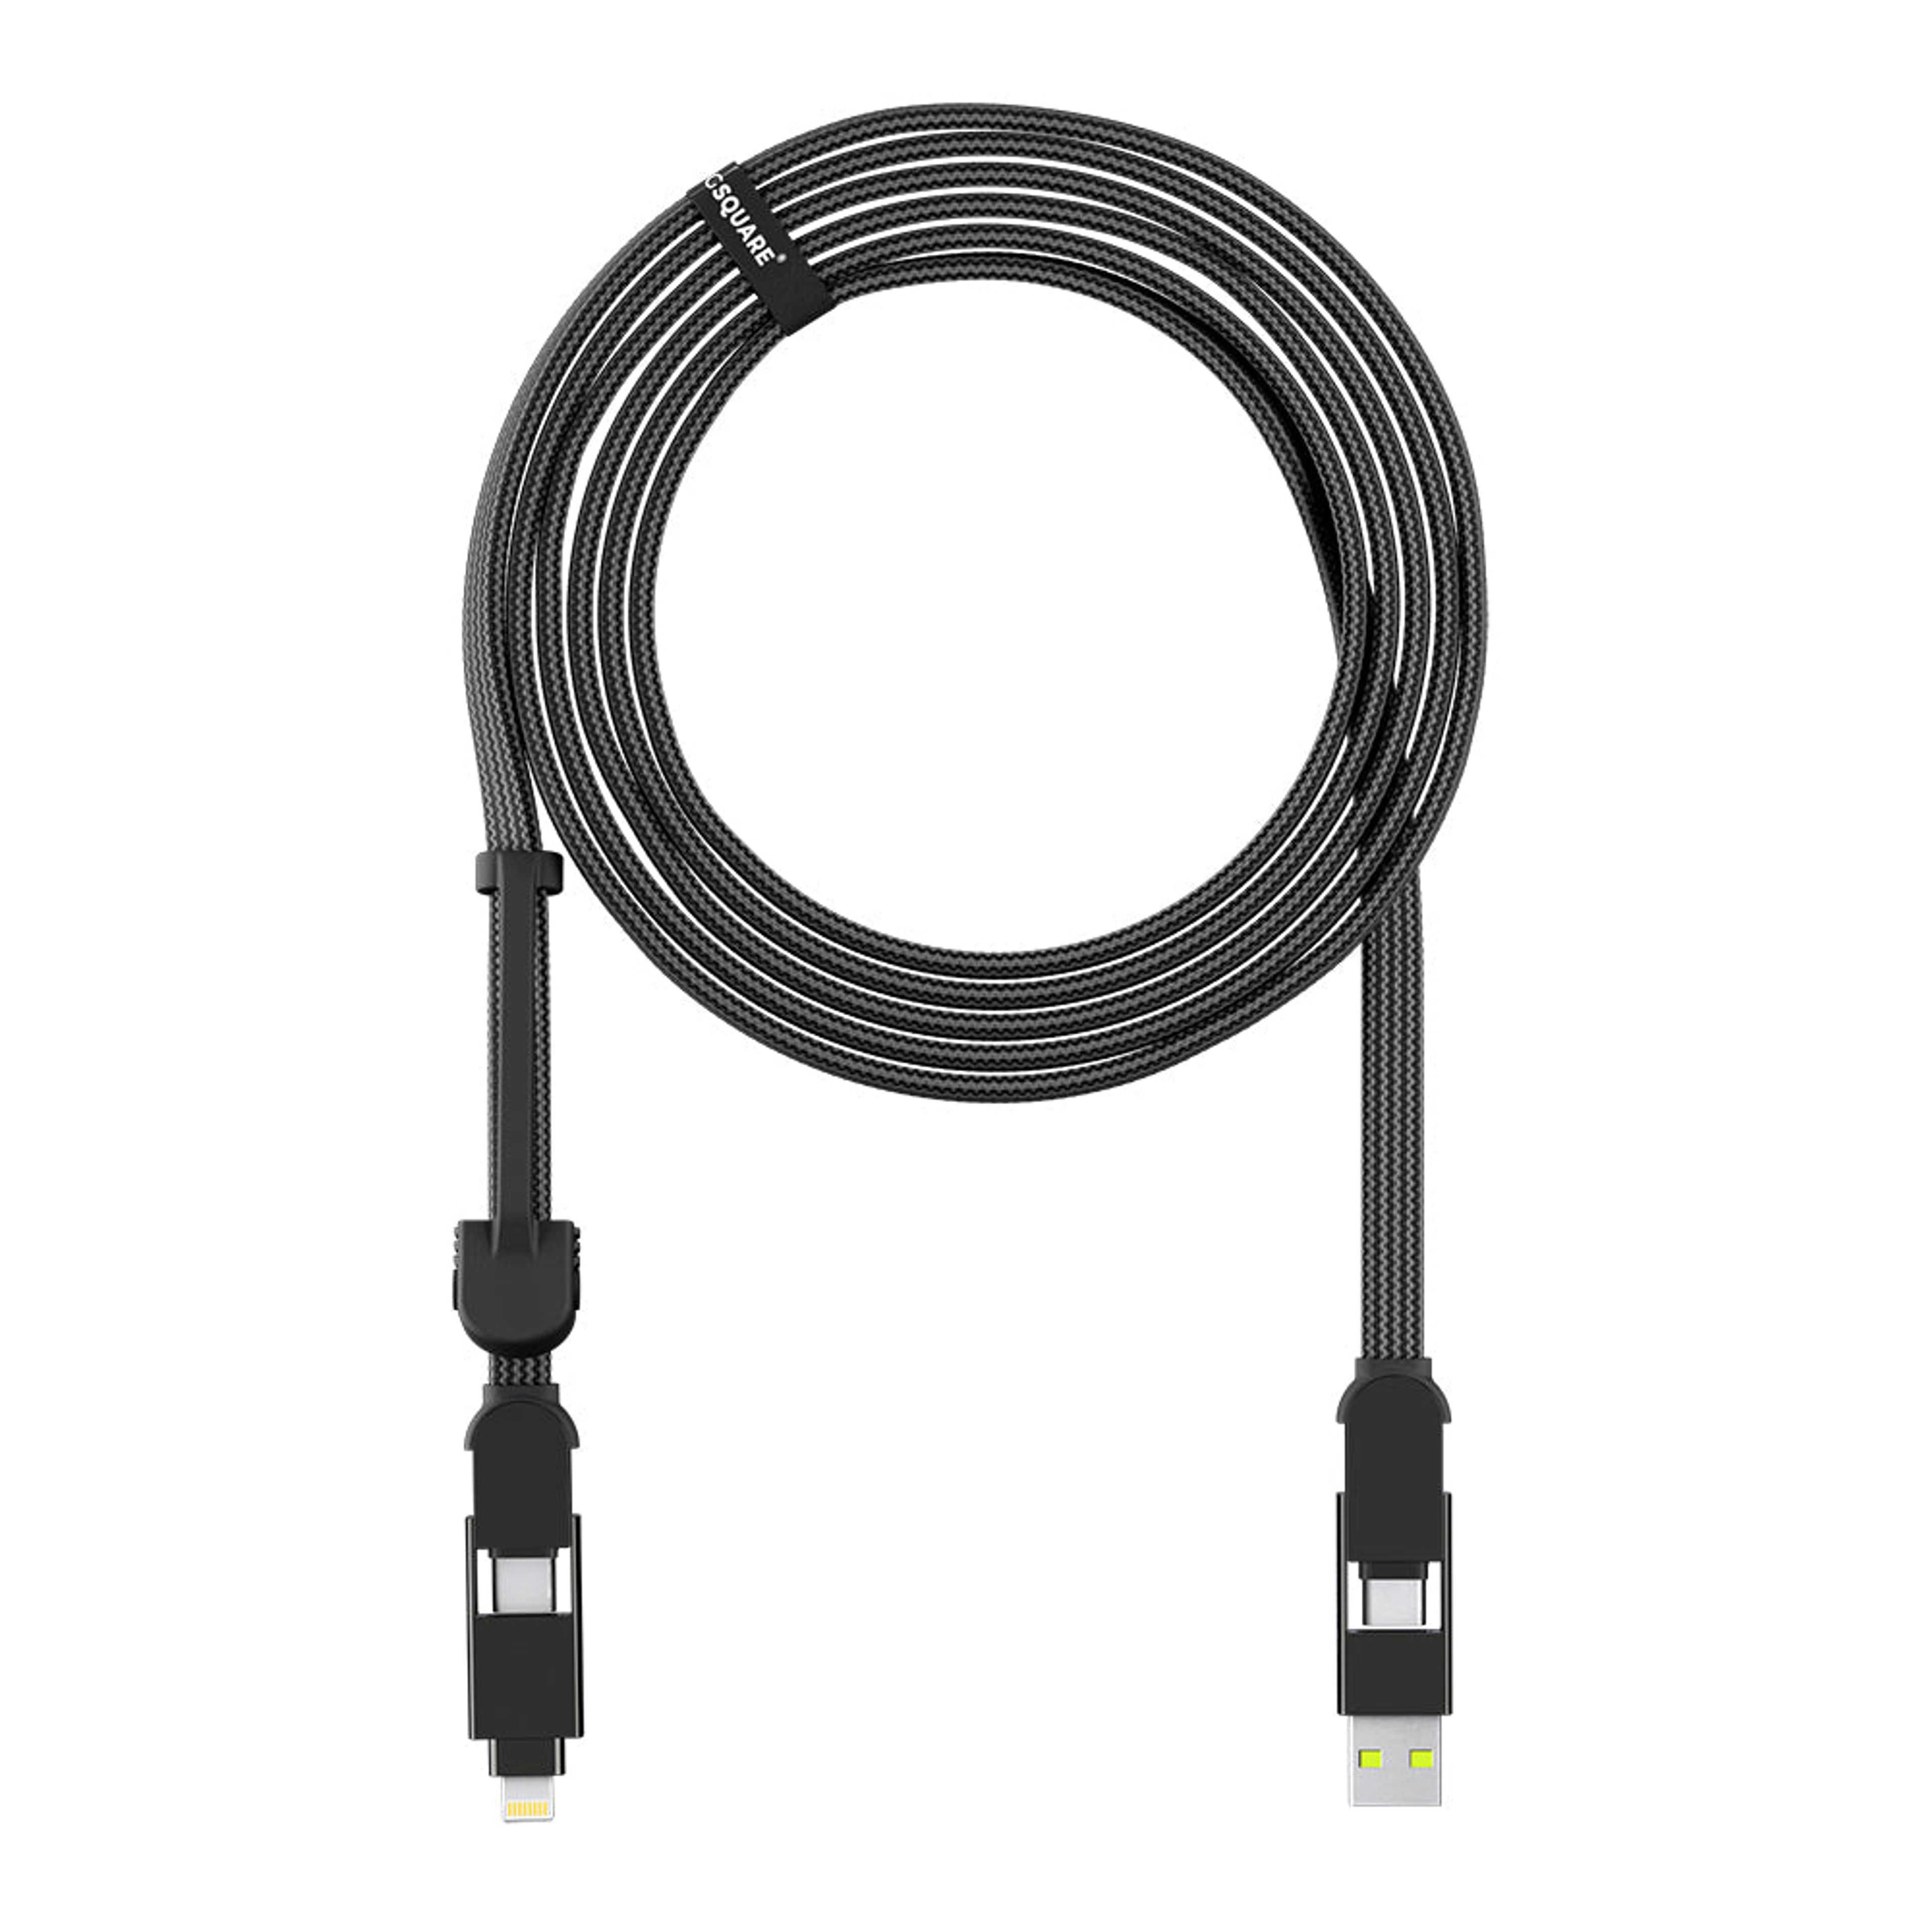 inCharge XL - 3m / 10ft - 6in1 universal 100W cable